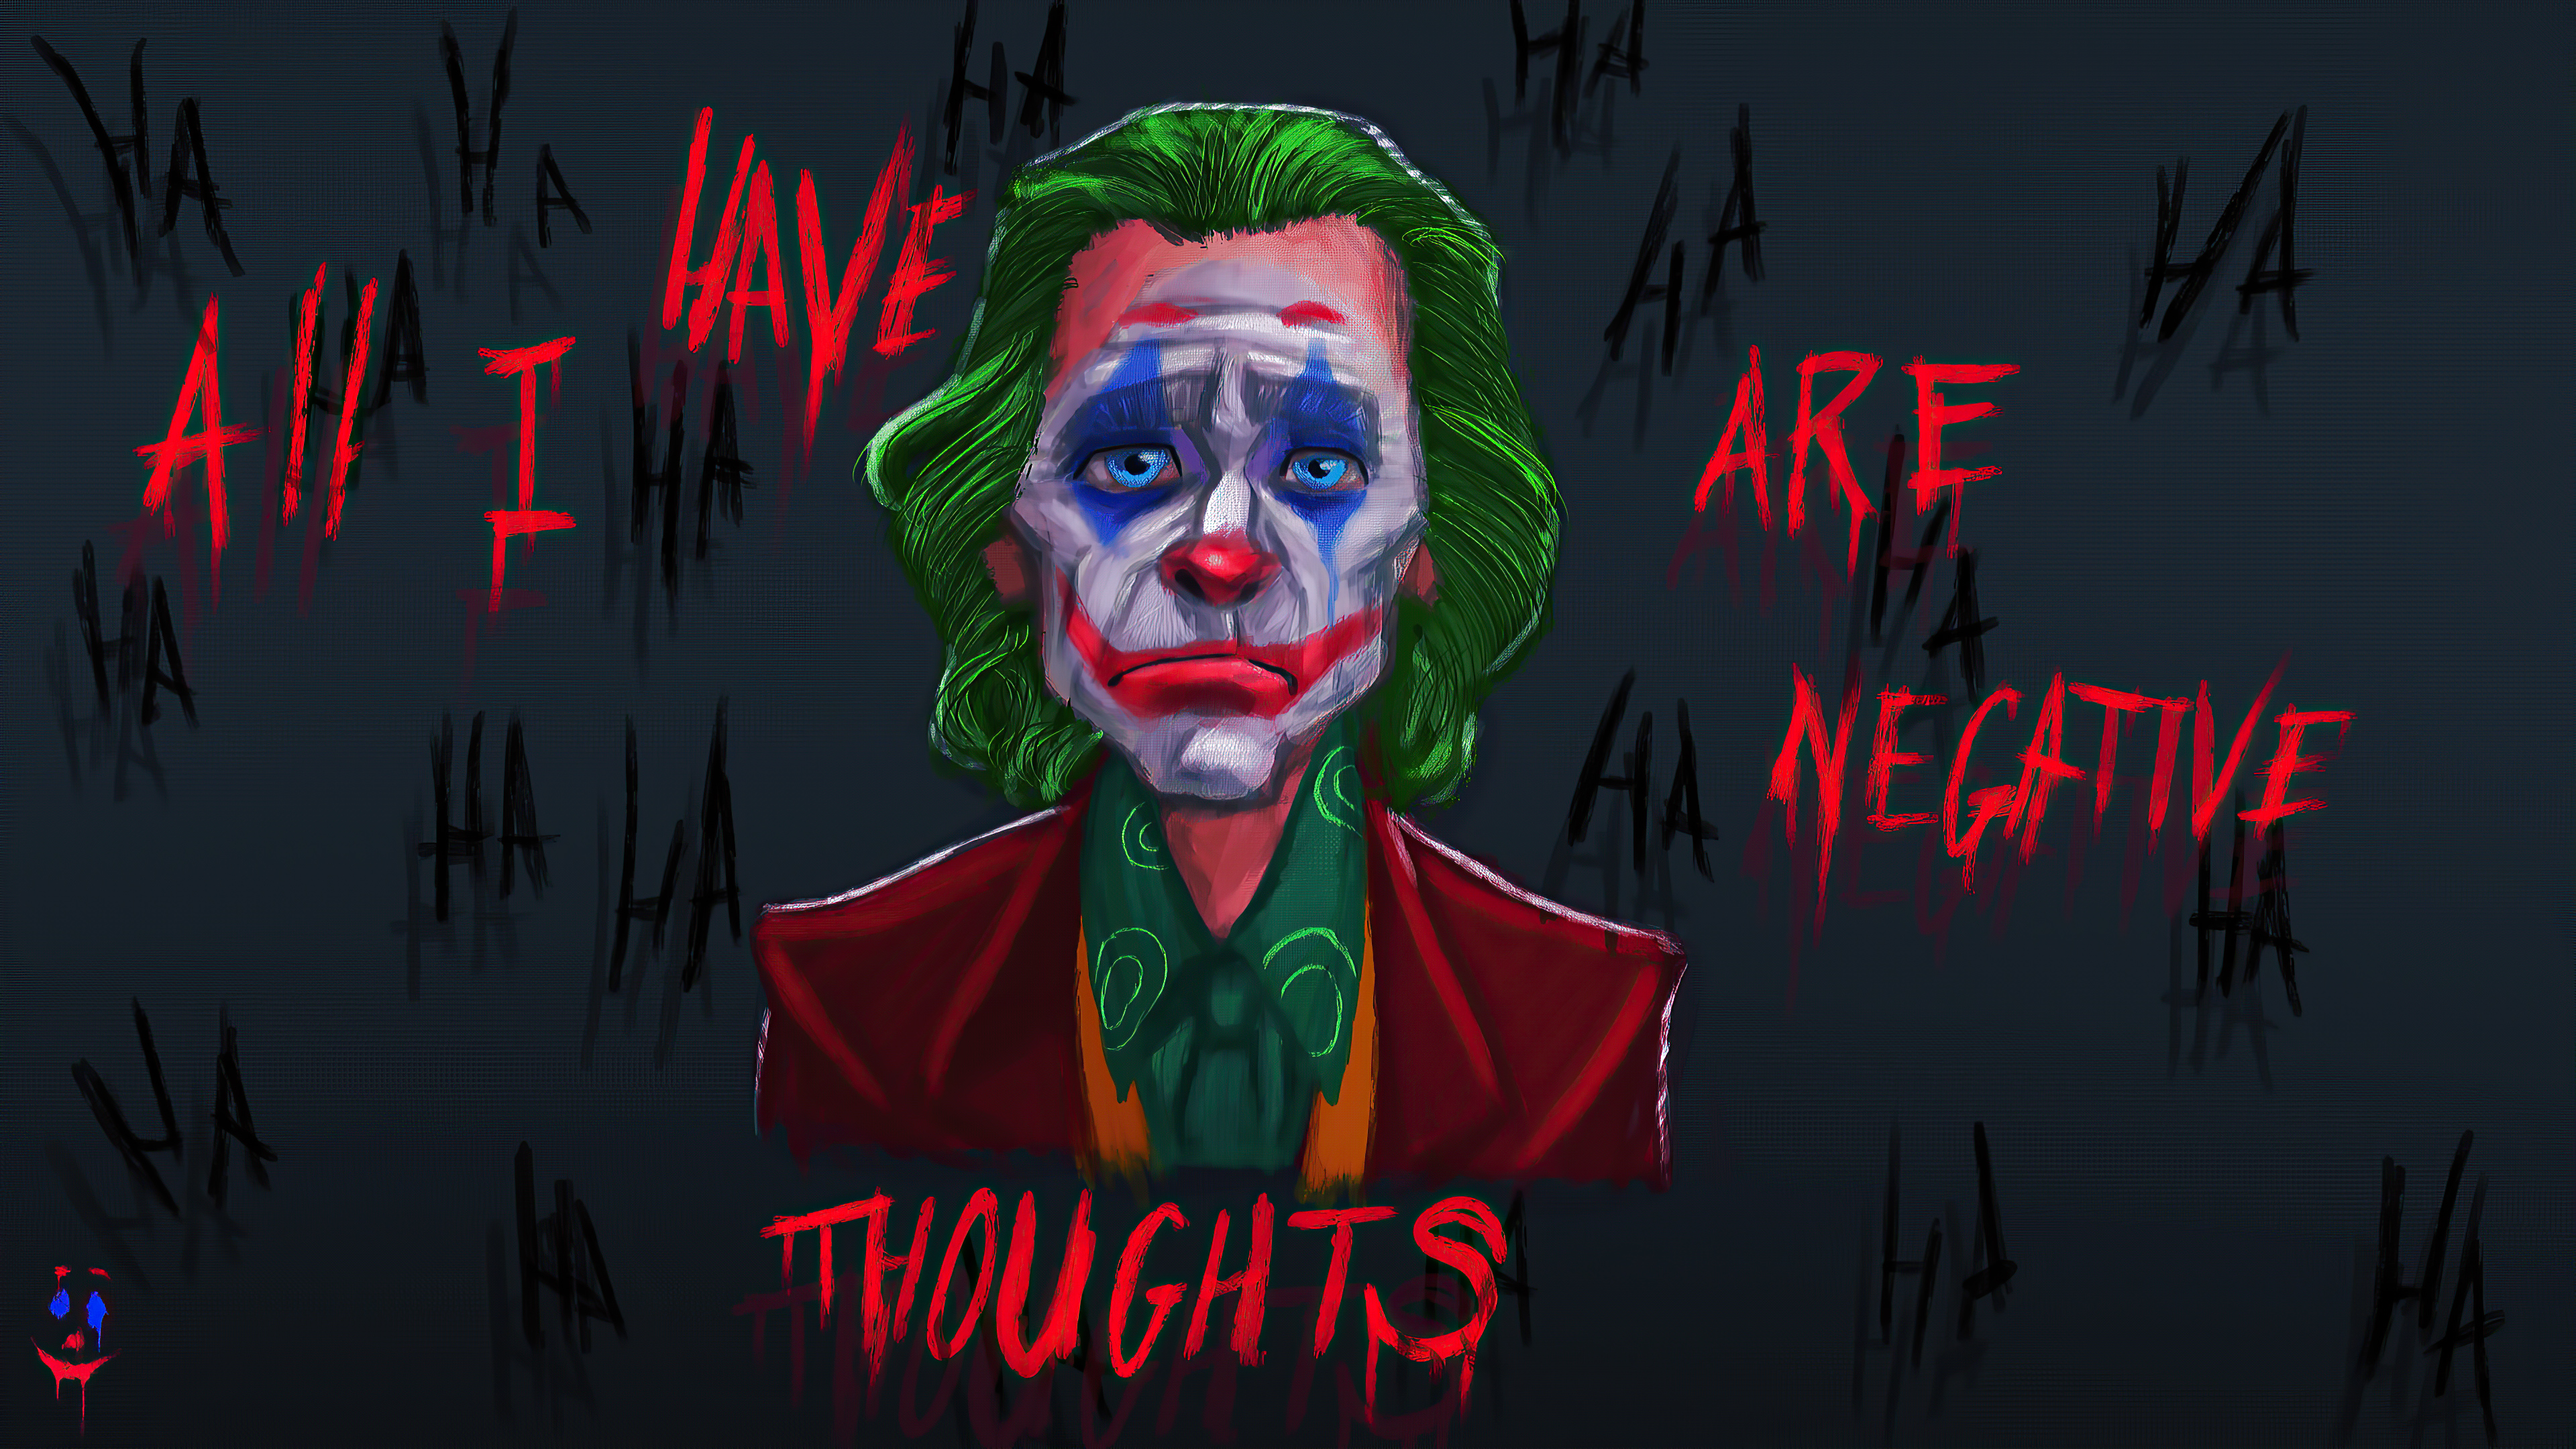 All I Have Negative Thoughts Joker Wallpapers